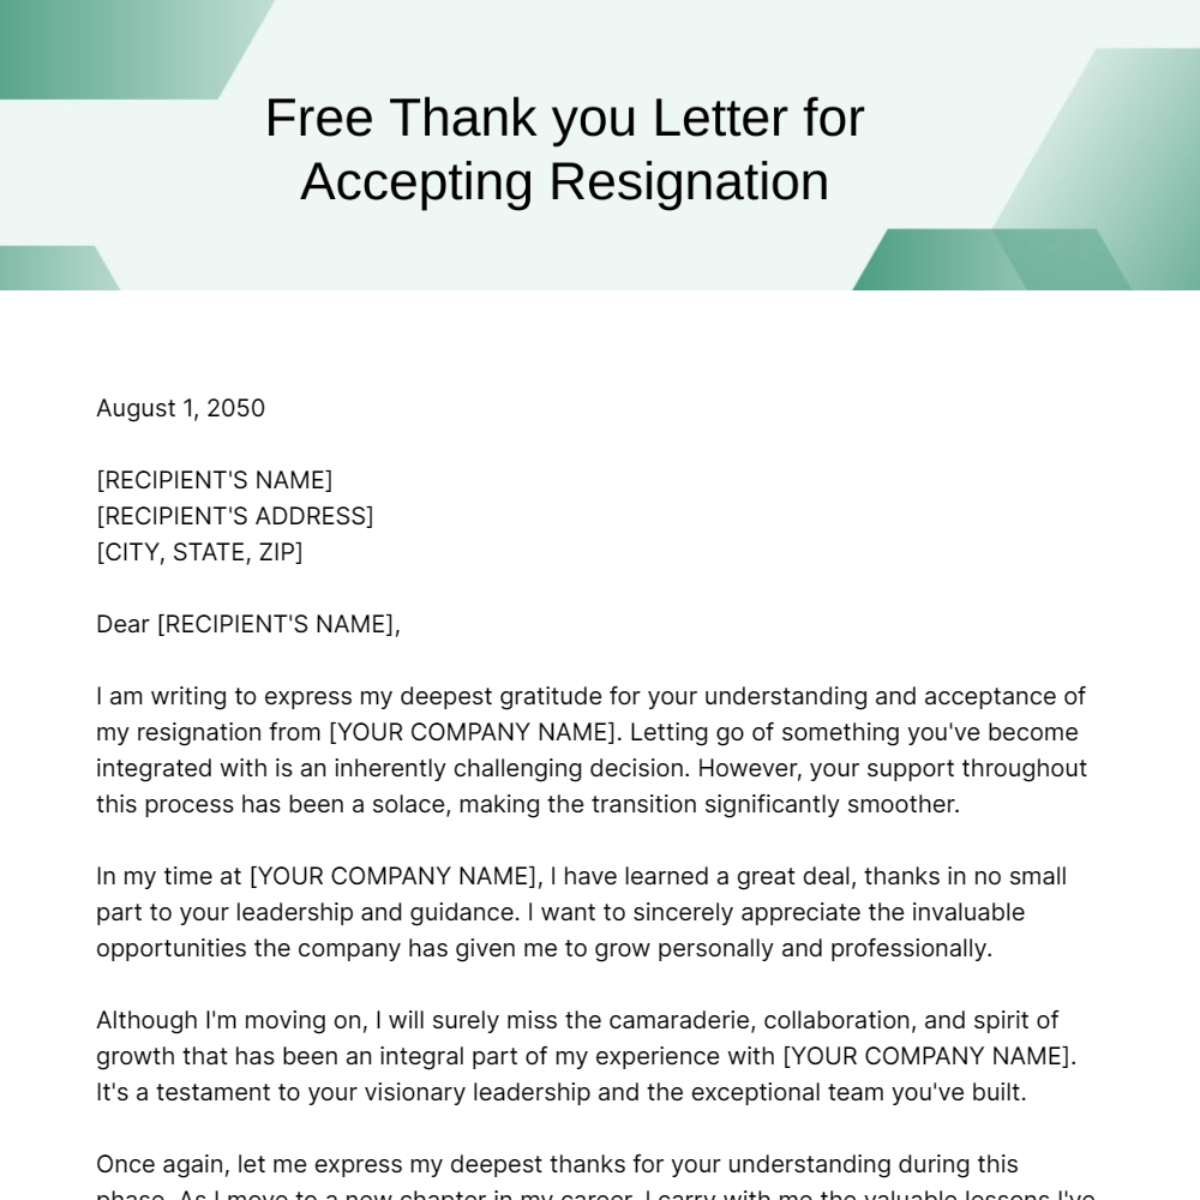 Thank you Letter for Accepting Resignation Template